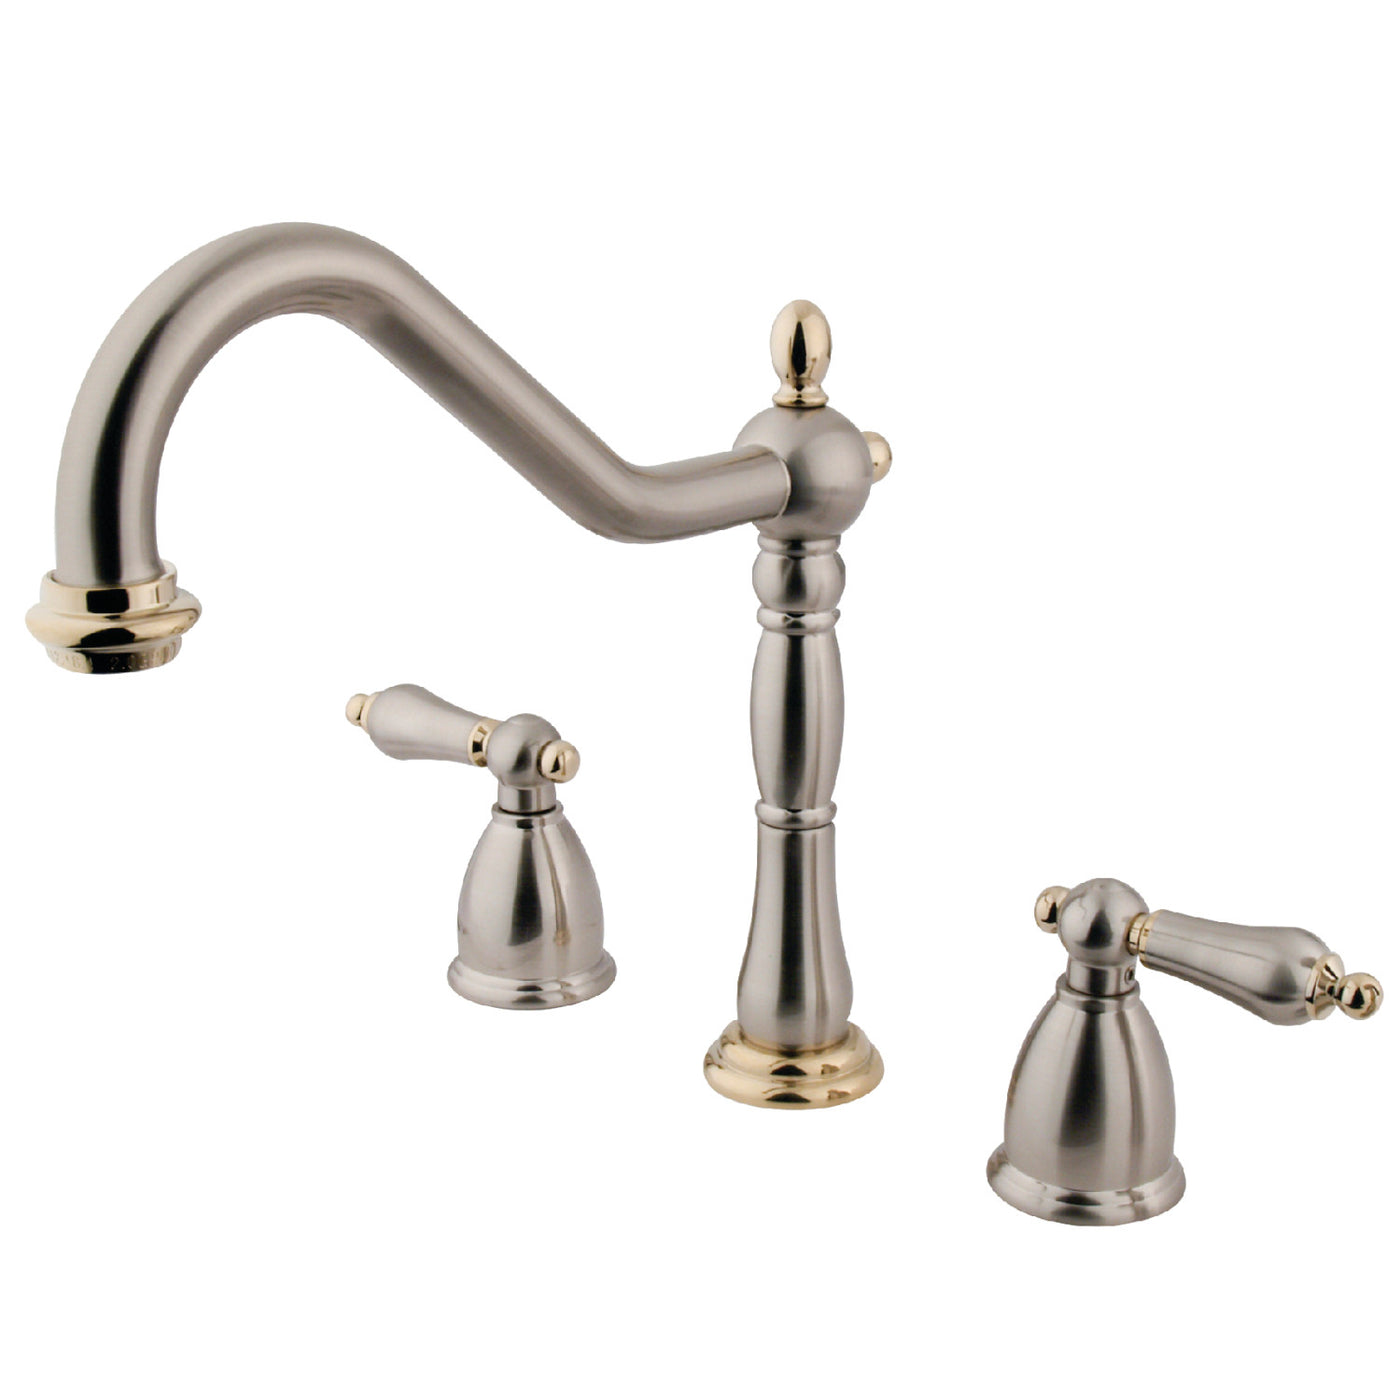 Elements of Design EB1799ALLS Widespread Kitchen Faucet, Brushed Nickel/Polished Brass